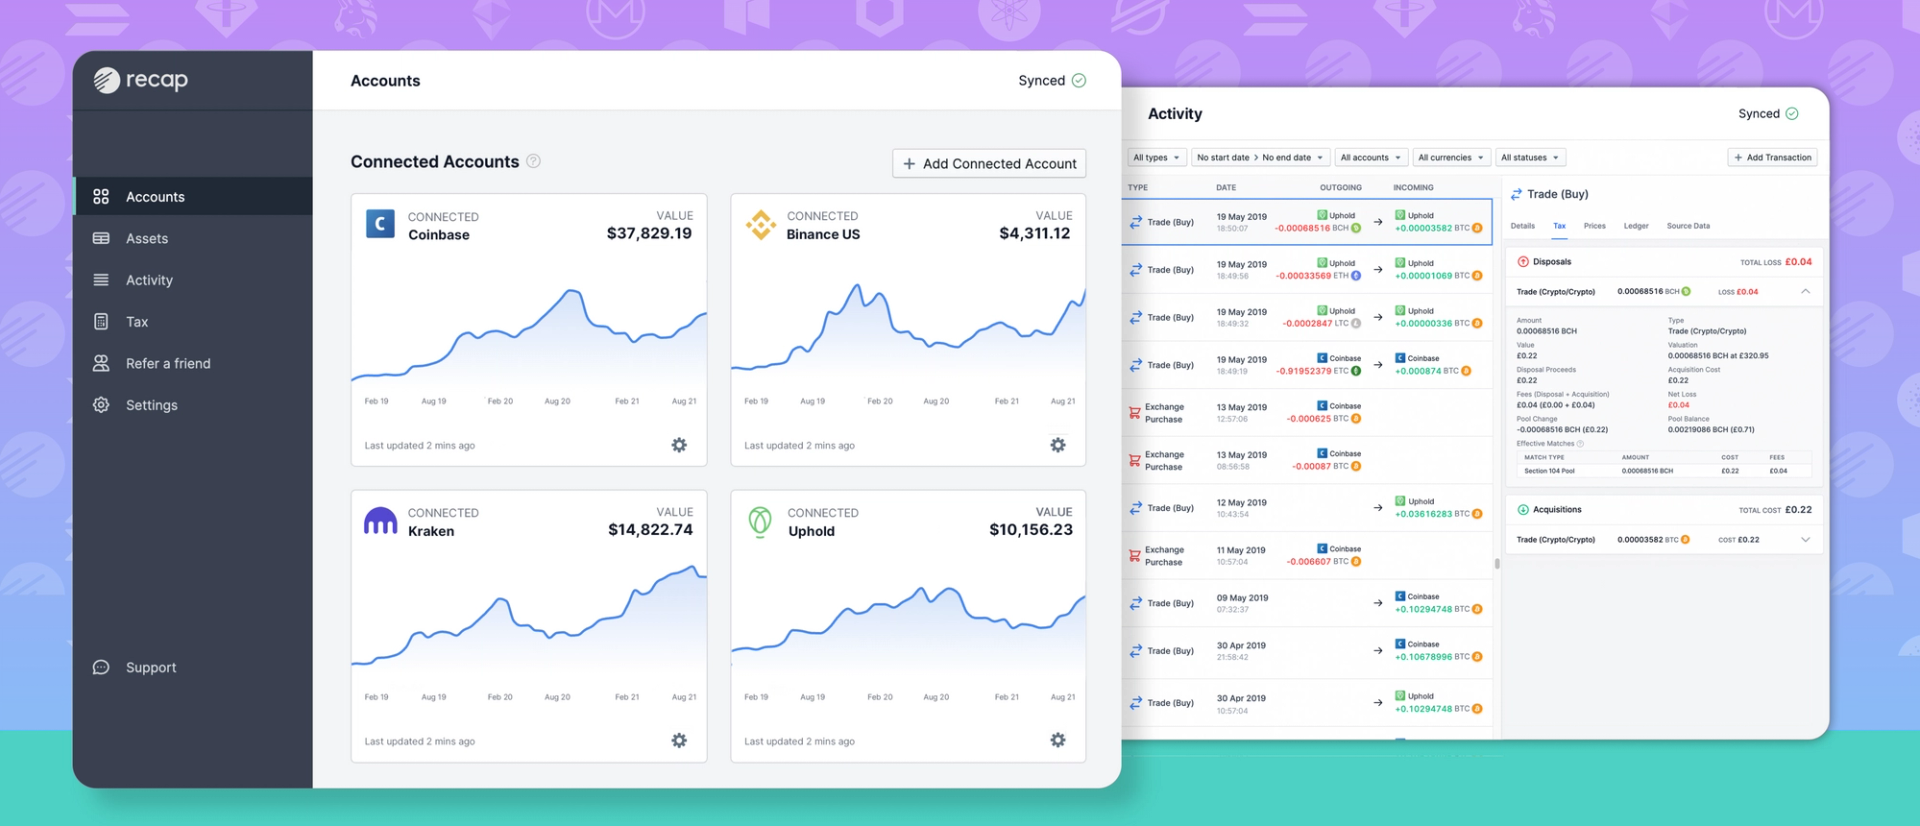 Recap screenshot, showing a users Coinbase, Binance, Kraken and Uphold accounts and the activity screen full of their trasactions. 